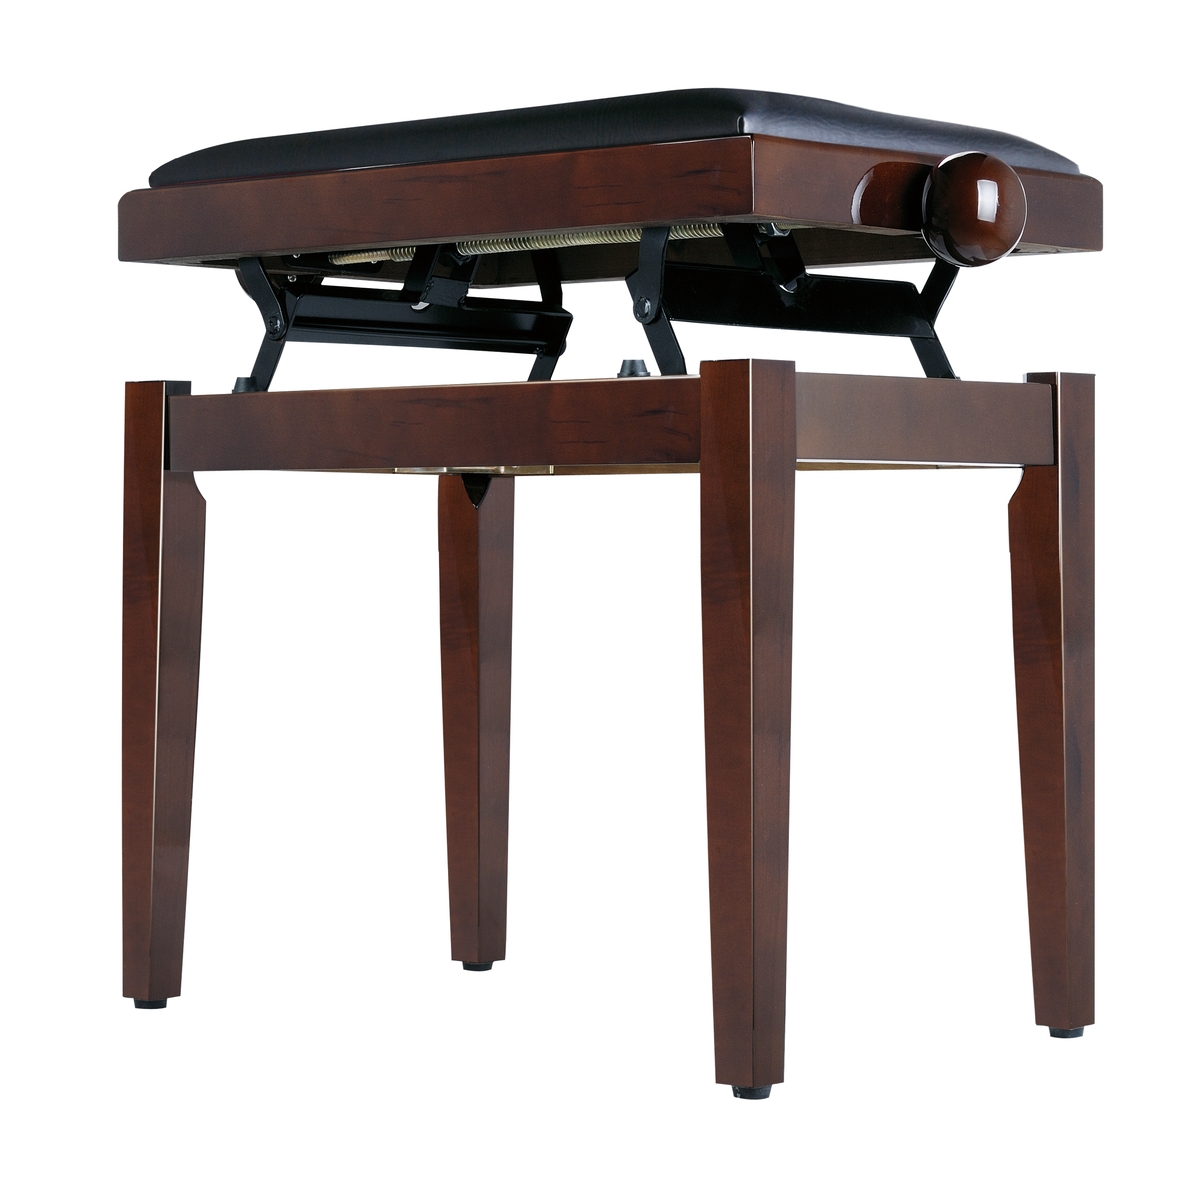 SOUNDSATION SBH-100P Rosewood Piano Bench